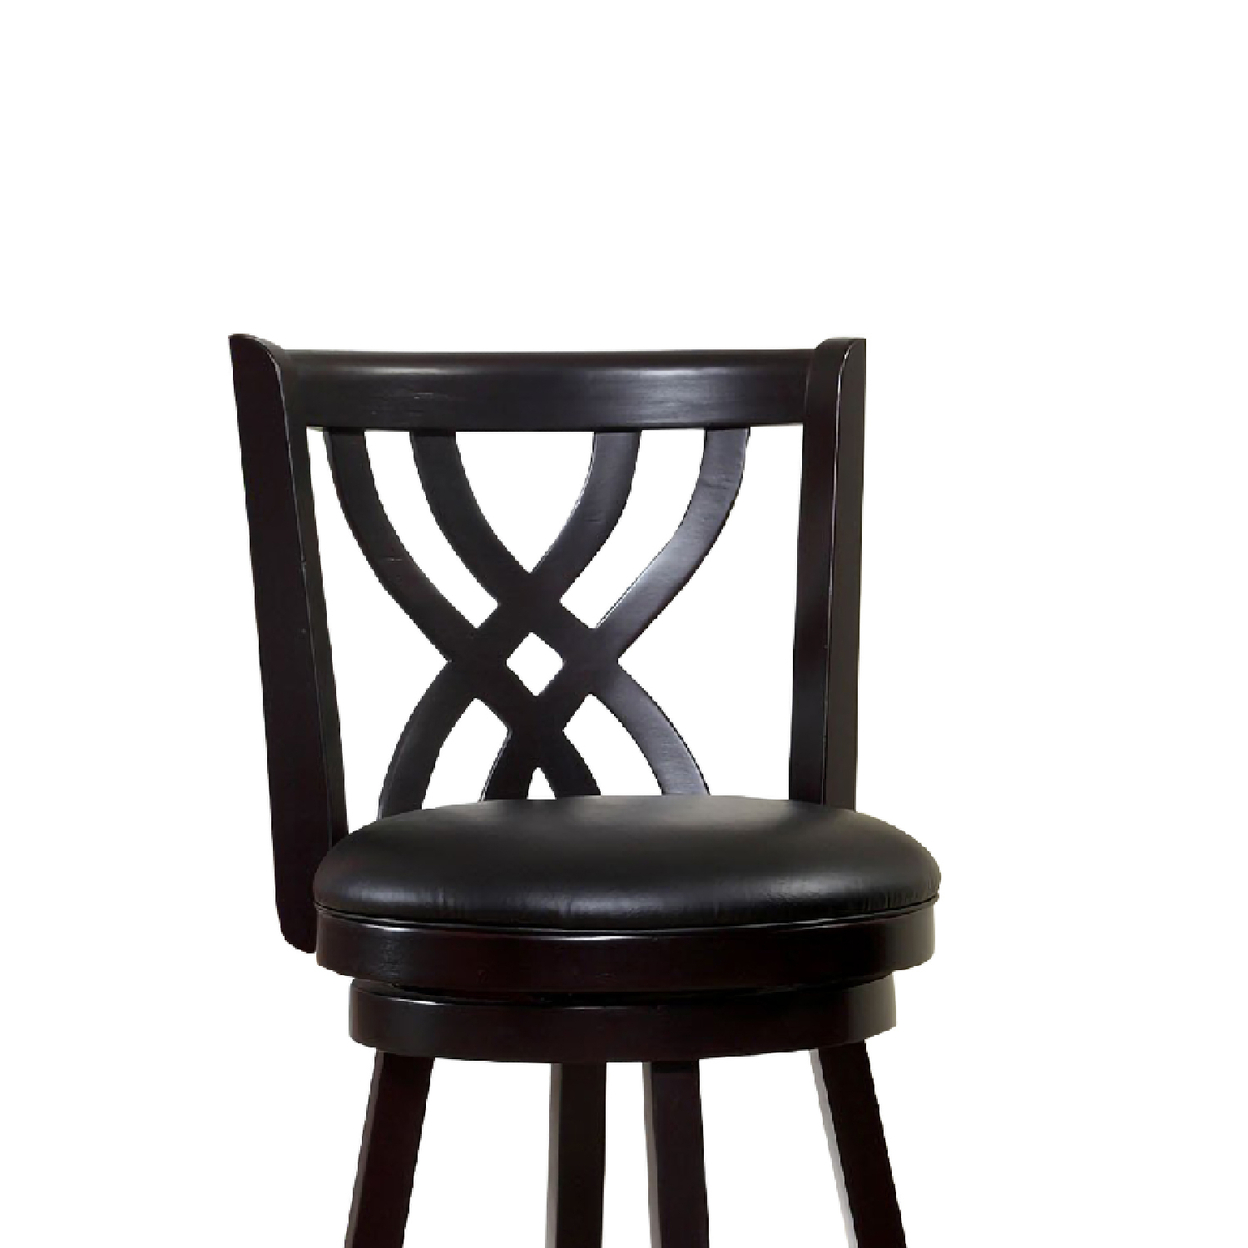 Swivel Barstool With Curved Double X Shaped Wooden Back, Espresso Brown- Saltoro Sherpi